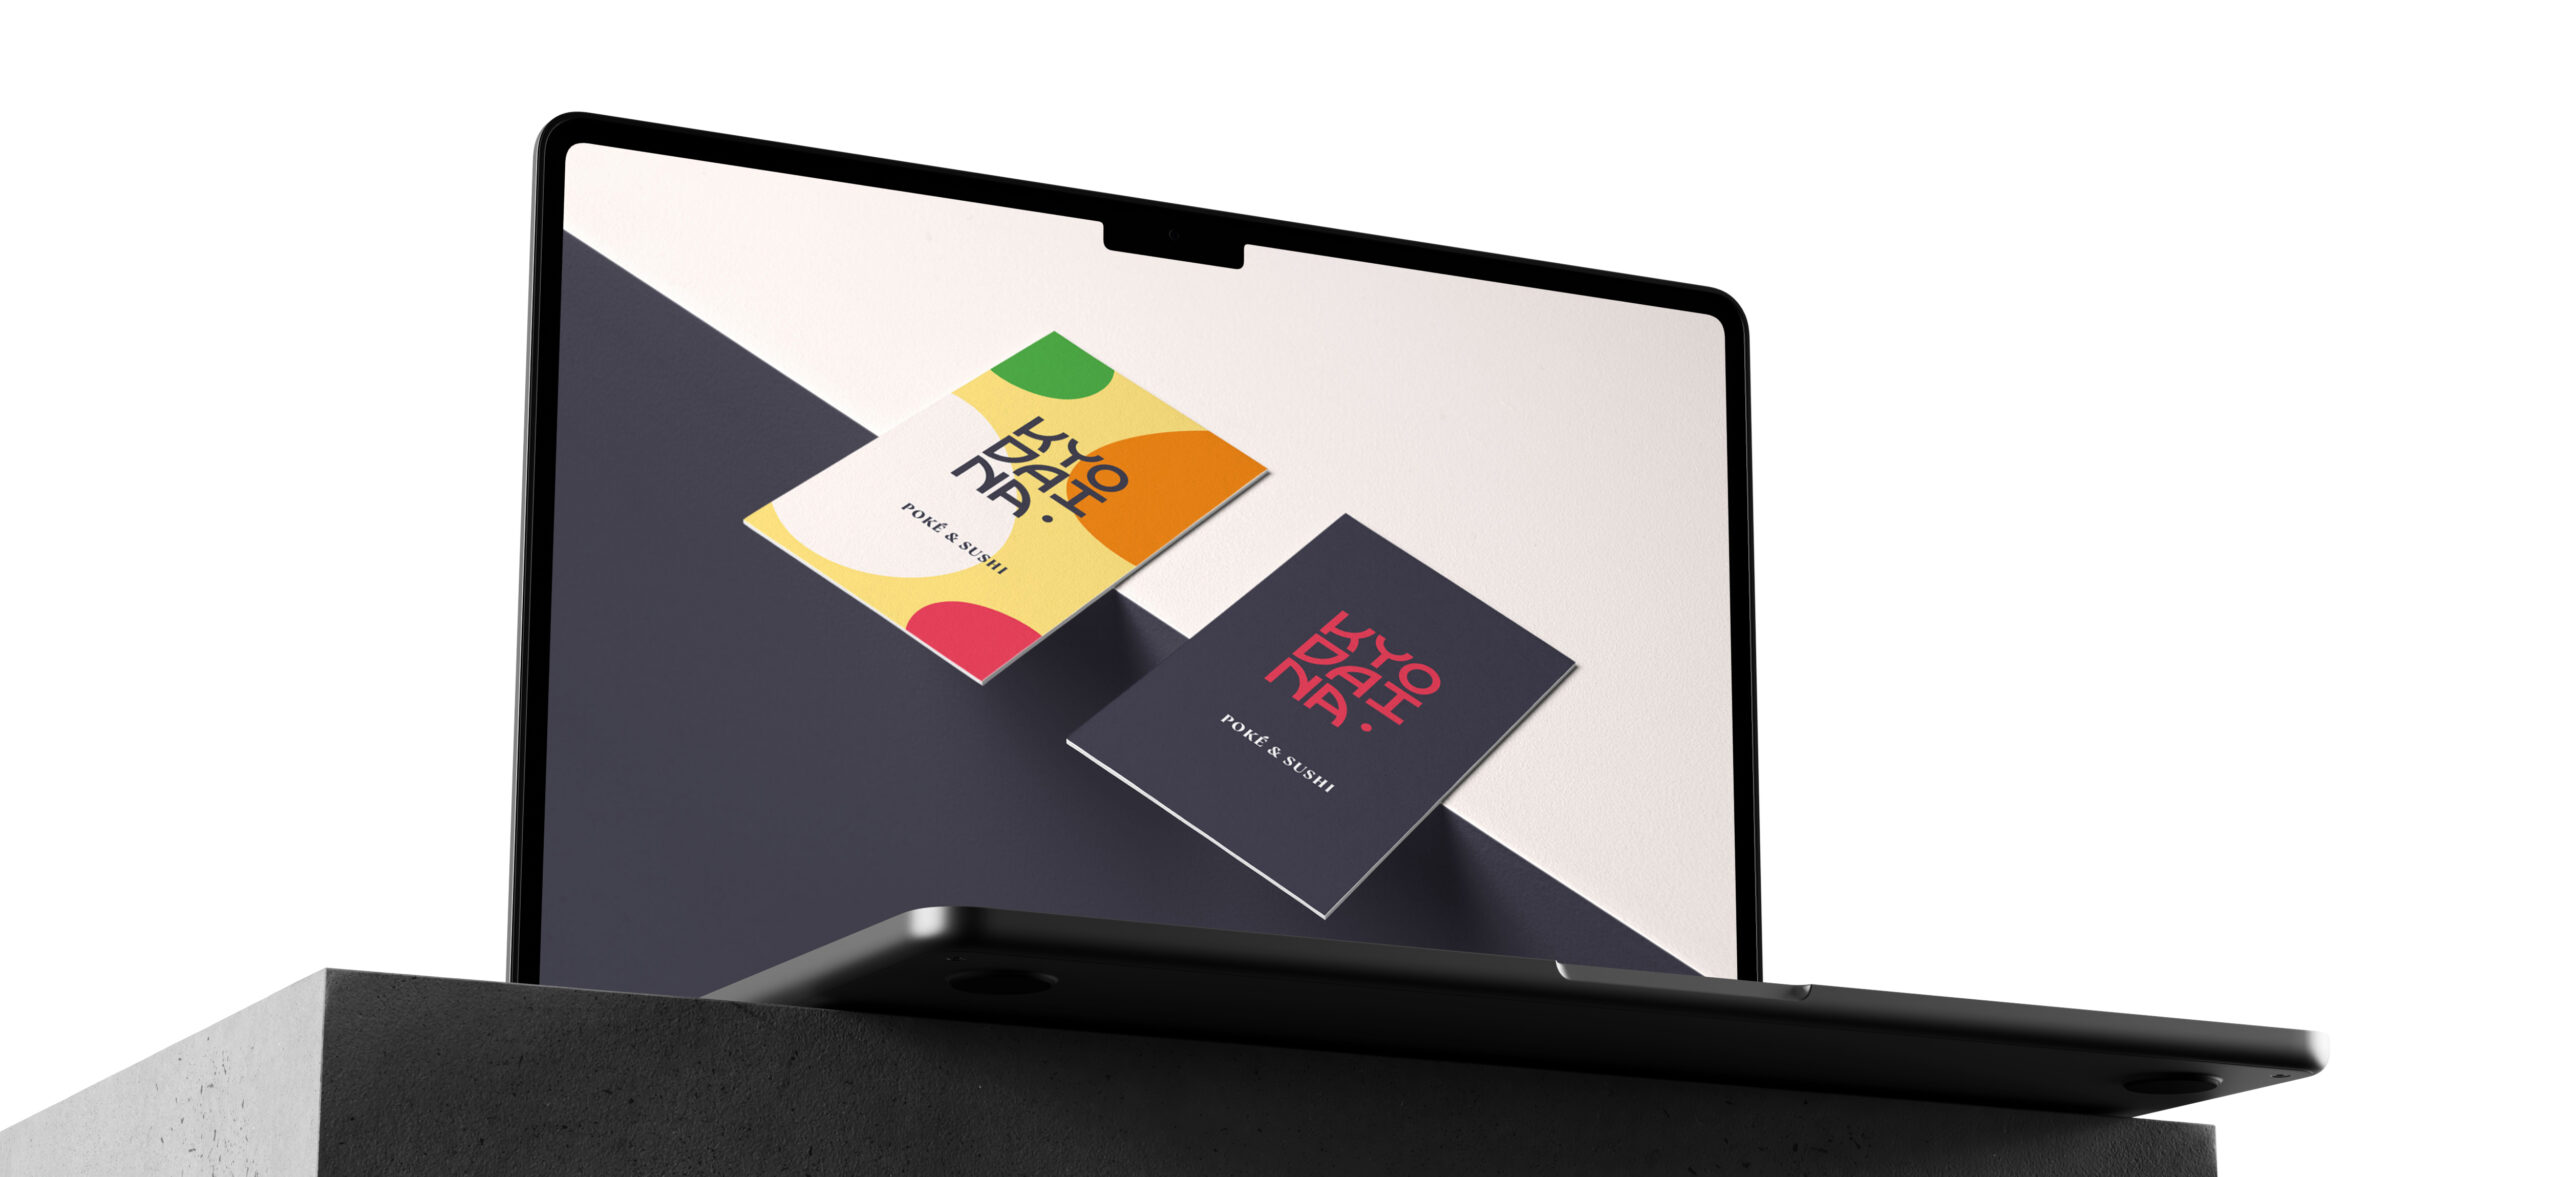 M2 Macbook Air Mockup #3 by Anthony Boyd Graphics